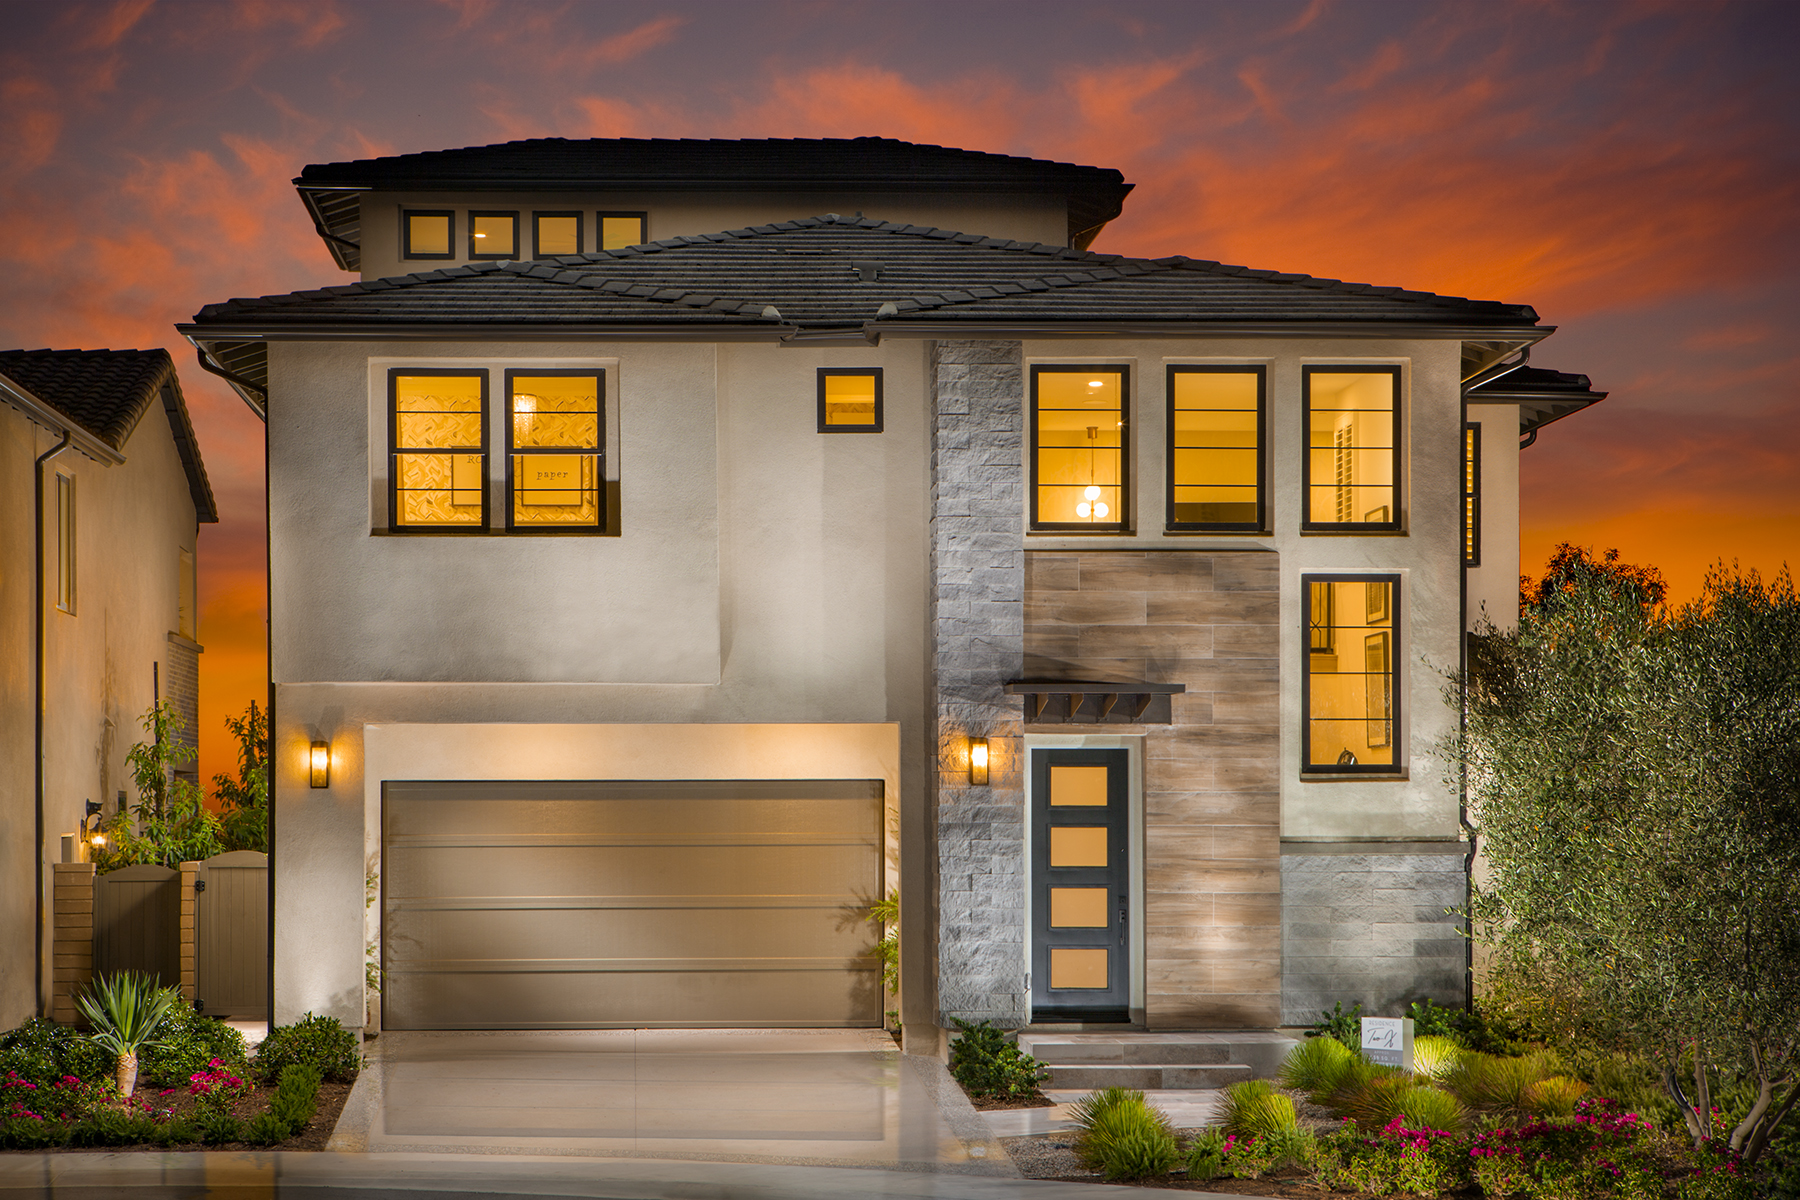 Inspired by Modern Spanish, Transitional and Modern Prairie architectural styles, as well as the setting among natural vistas and open space, the inviting, two- and three-story detached residences at Teresina by Shea Homes, is exciting both in design as well as setting in a charming hillside neighborhood in Lake Forest, CA. Pictured: Plan 2.